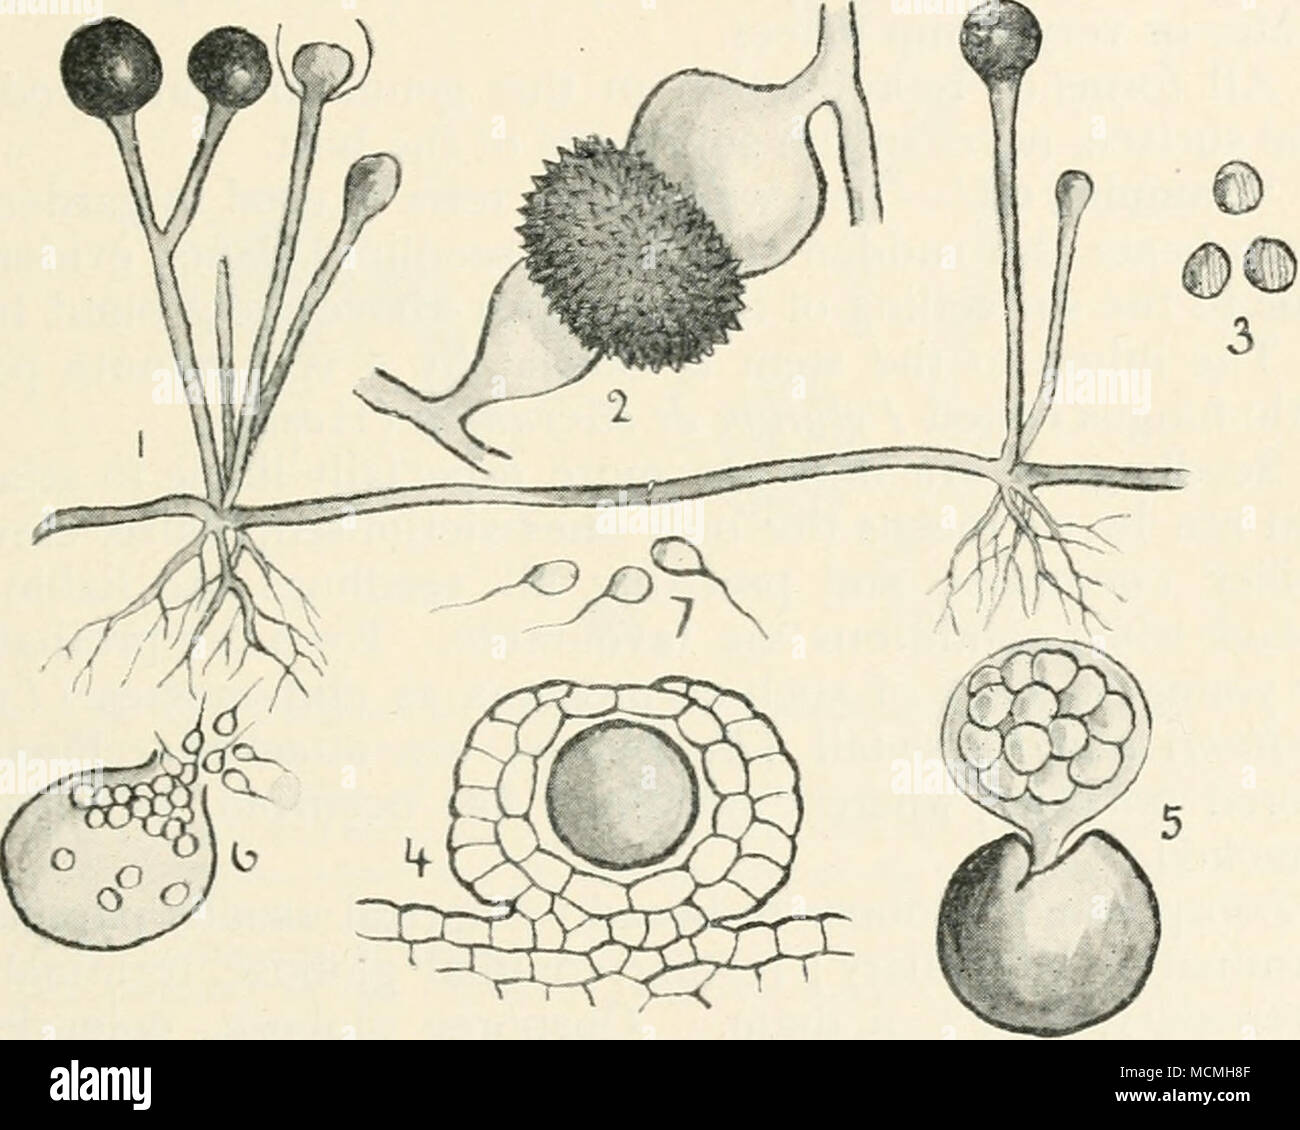 . Fig. 22.—Rhizopus nigricans, i. portion of fungus; 2, zygo- spore; 3, spores; 4, Synchytrium taraxici; resting-spore in epidermal cell ; 5, resting-spore liberating a mass of sporangia ; 6, a sporangium liberating zoospores. All highly mag. Synchy trill in Niessii (Bubak) forms warts on the leaves of Gagea and Ornithogalum utjibellatum. The warts are at first dirty white, bounded by a dark brown line. Resting-spores globose, single or 2-10, sometimes up to 20 in inflated or spindle-shaped epidermal cells. Bubak, F., Sep. Osterr. Bot. Zeitschr., No. 7, Ser. 2 (1898). Stock Photo